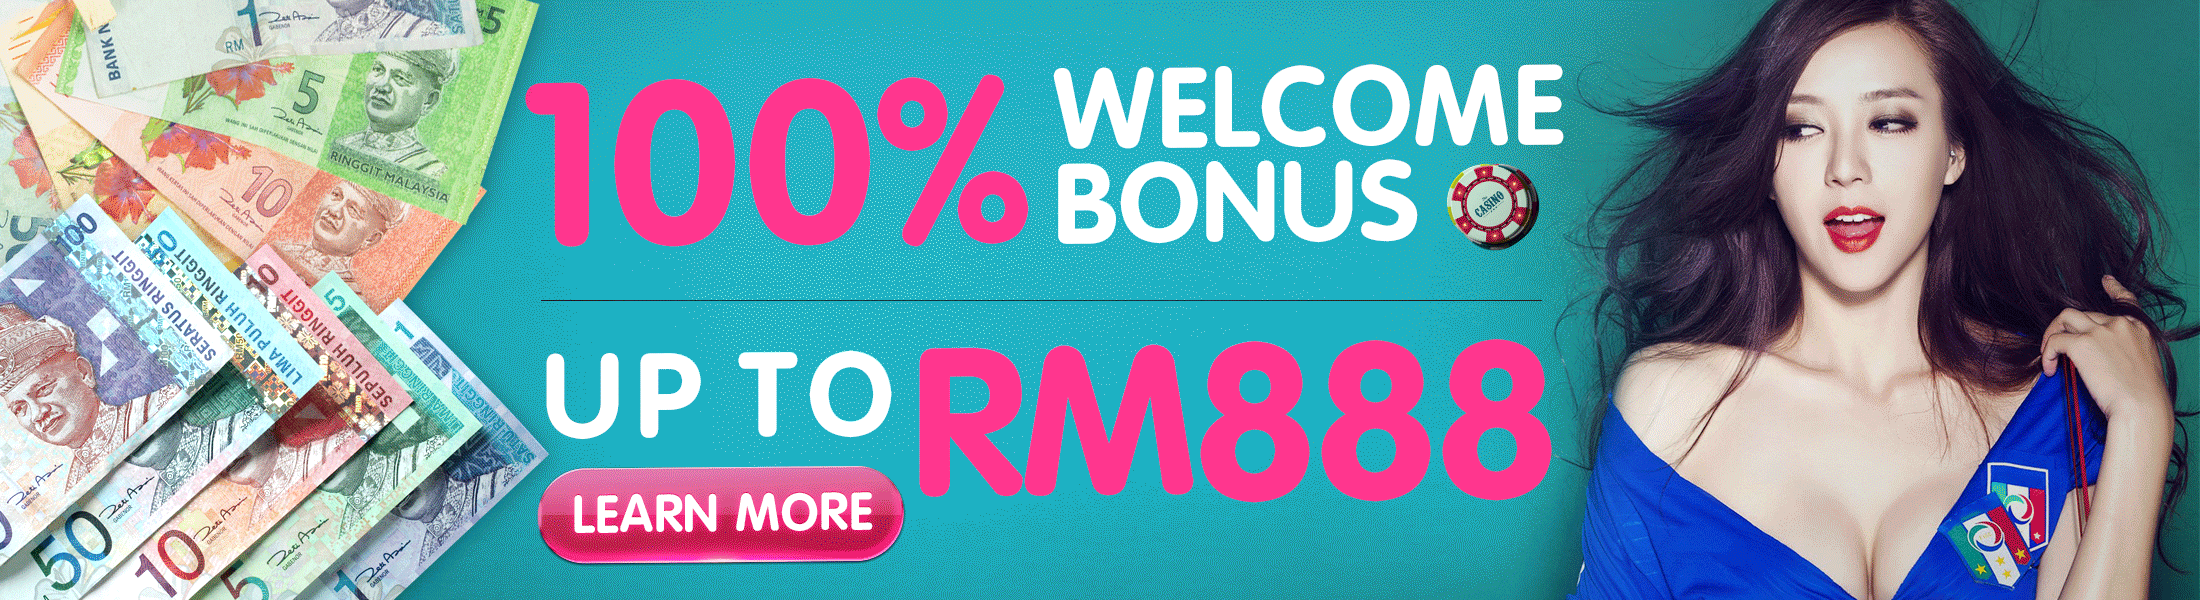 ntc33 Online Slot Recommend Welcome Bonus Up to RM888